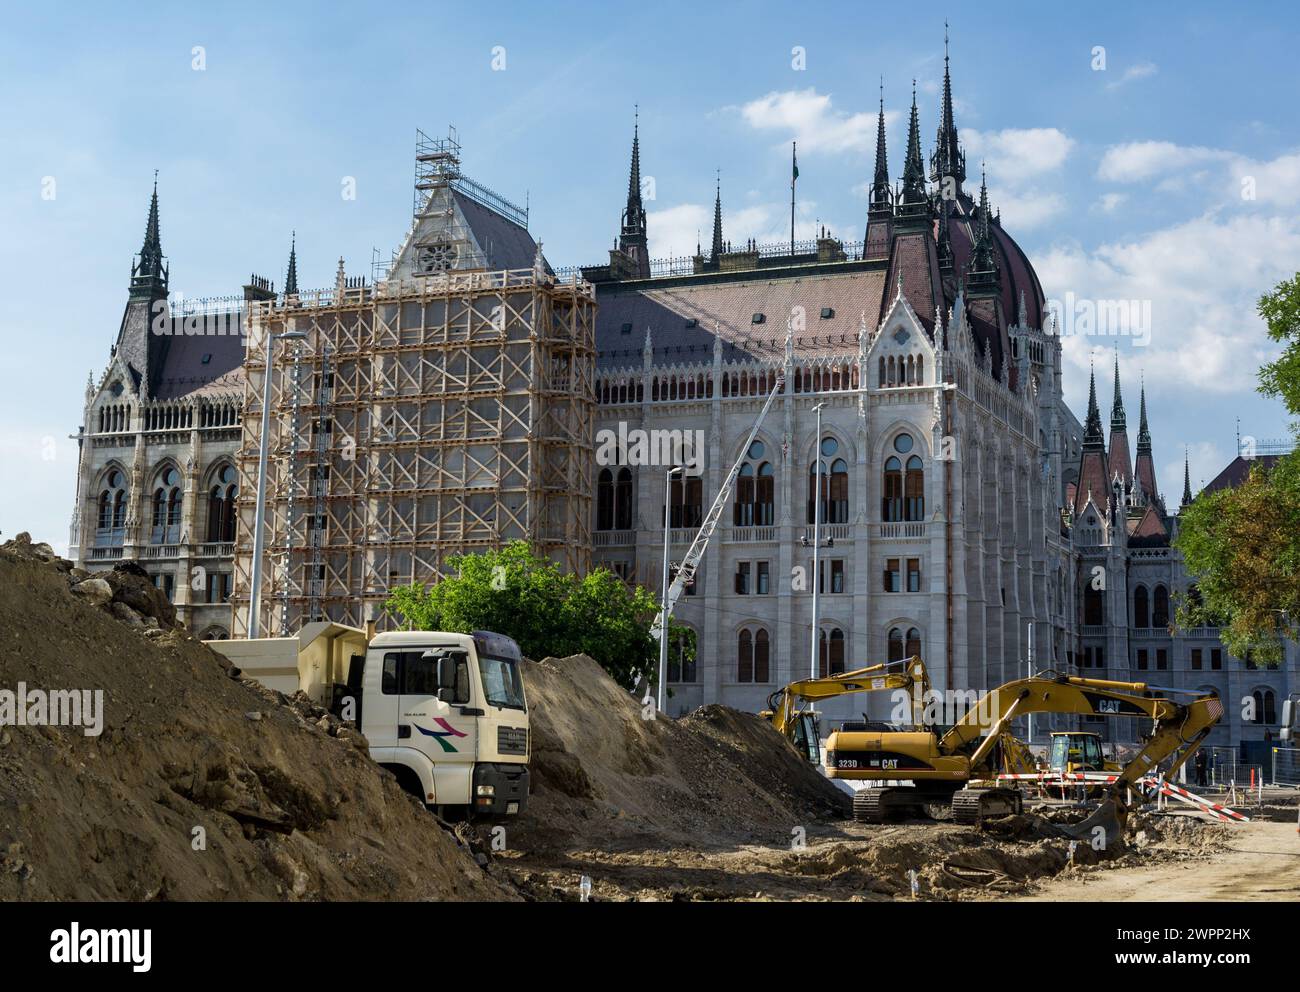 BUDAPEST, HUNGARY - JUNE 19, 2013: Reconstruction of old building of Budapest Parliament in Hungary Stock Photo